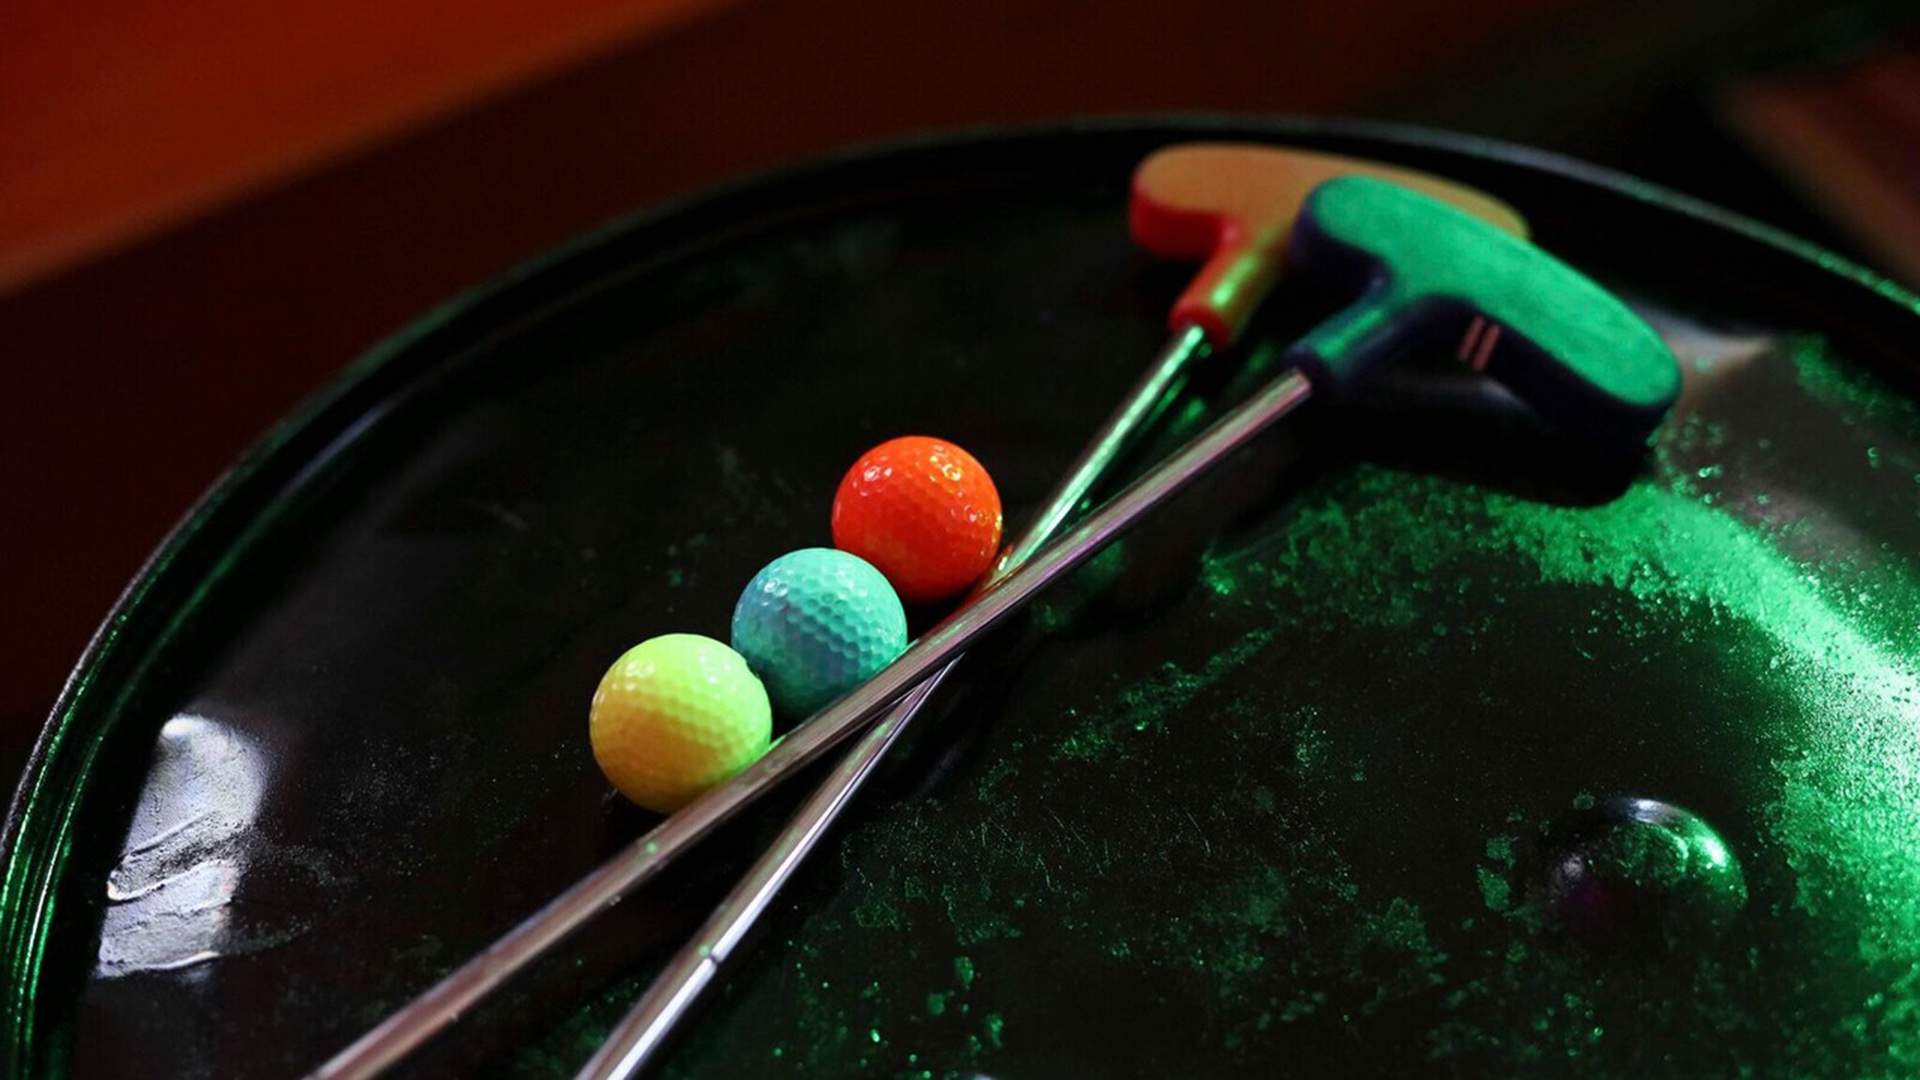 Brisbane's Insane Mini-Golf Bar Holey Moley Is Coming to Melbourne